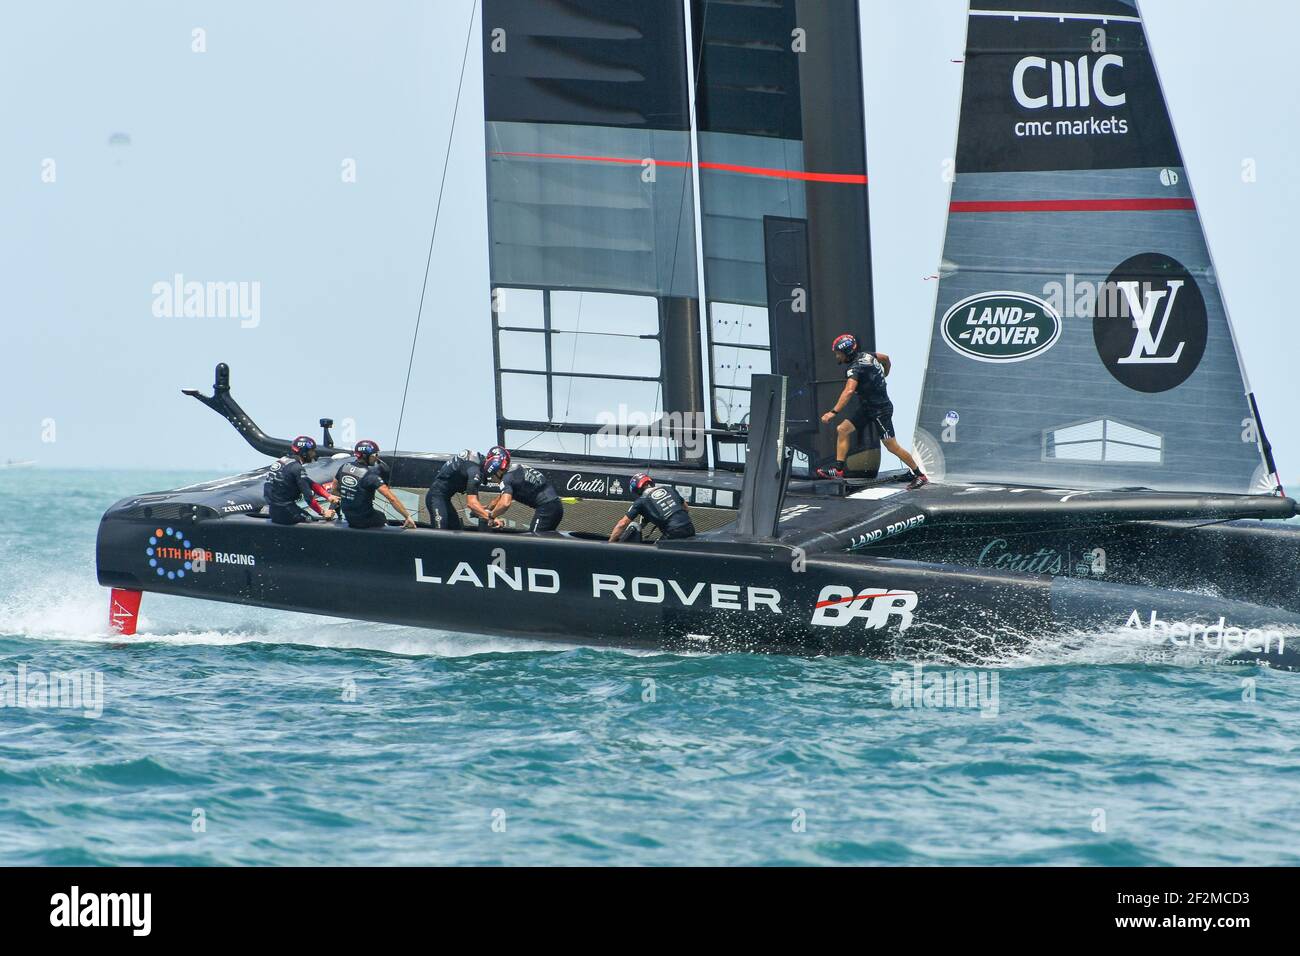 Louis Vuitton America's Cup Playoffs: Semi-Final June 2017 - from